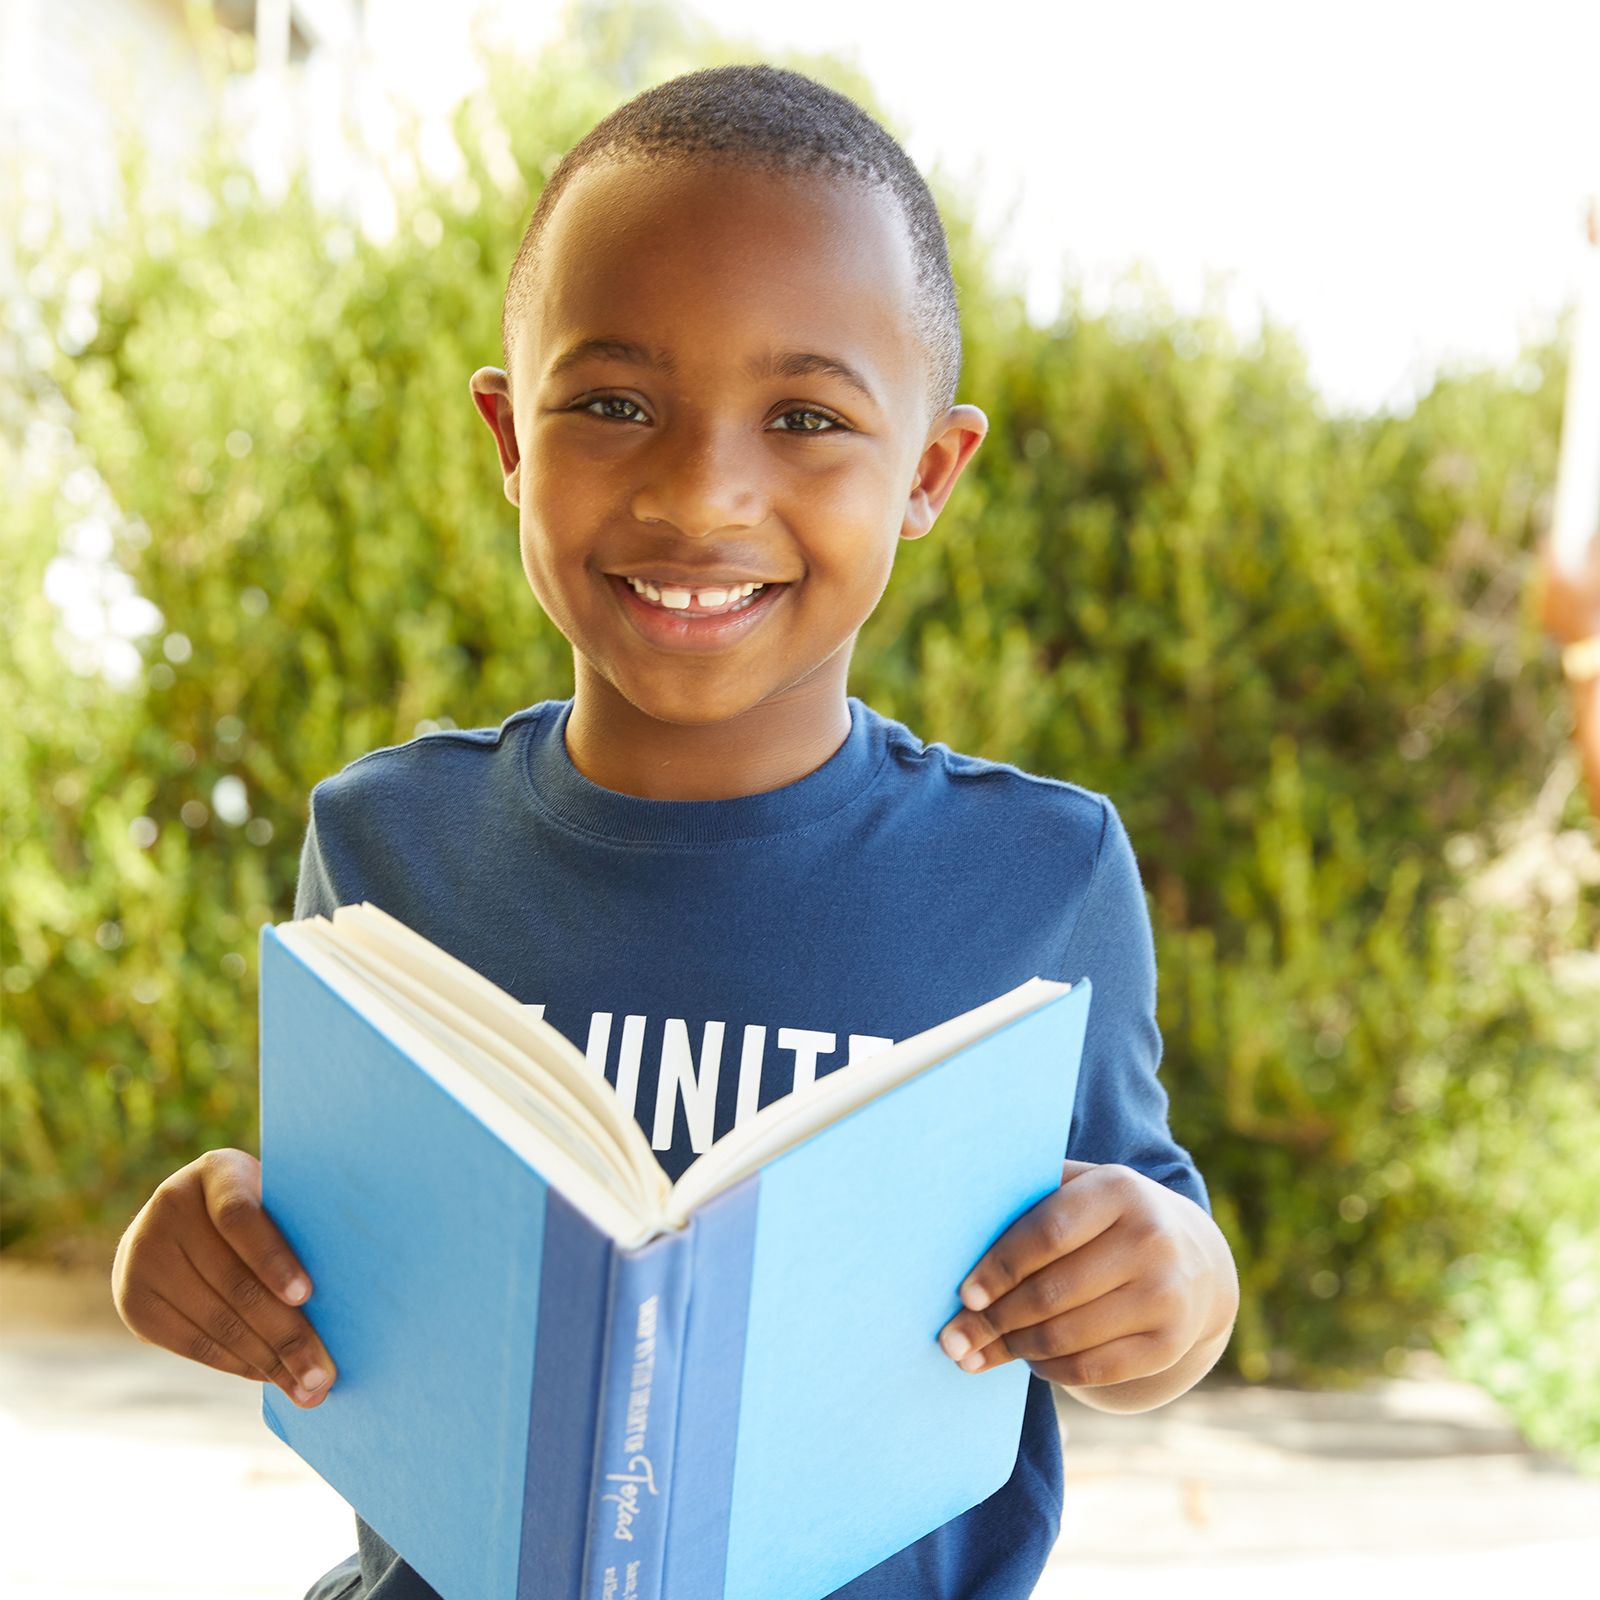 young boy with book in his hands, smiling